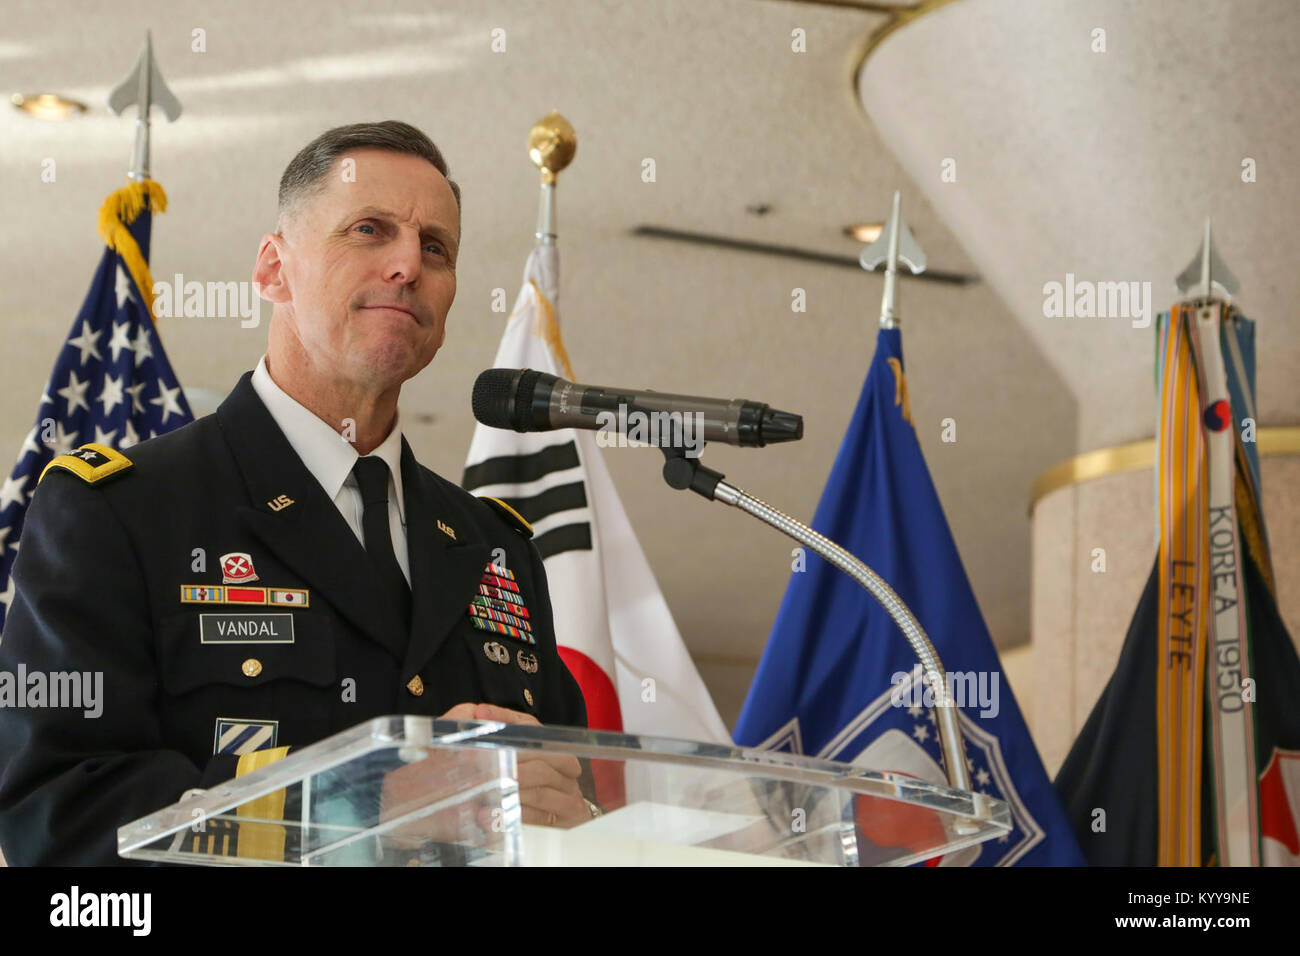 U.S Army Lt. Gen. Thomas S. Vandal commander of the Eighth Army, provides opening remarks at the Holiday concert in Seoul, Korea Dec. 17, 2017. The concert was hosted by the Eighth Army command in conjunction with local community leaders during the holiday season to promote harmonious relations between the U.S. Army and the Republic of Korea (ROK). Over 1500 U.S. Soldiers and ROK soldiers attended performances by the Eighth Army Band and the Prime Philharmonic Orchestra . (U.S. Army Stock Photo